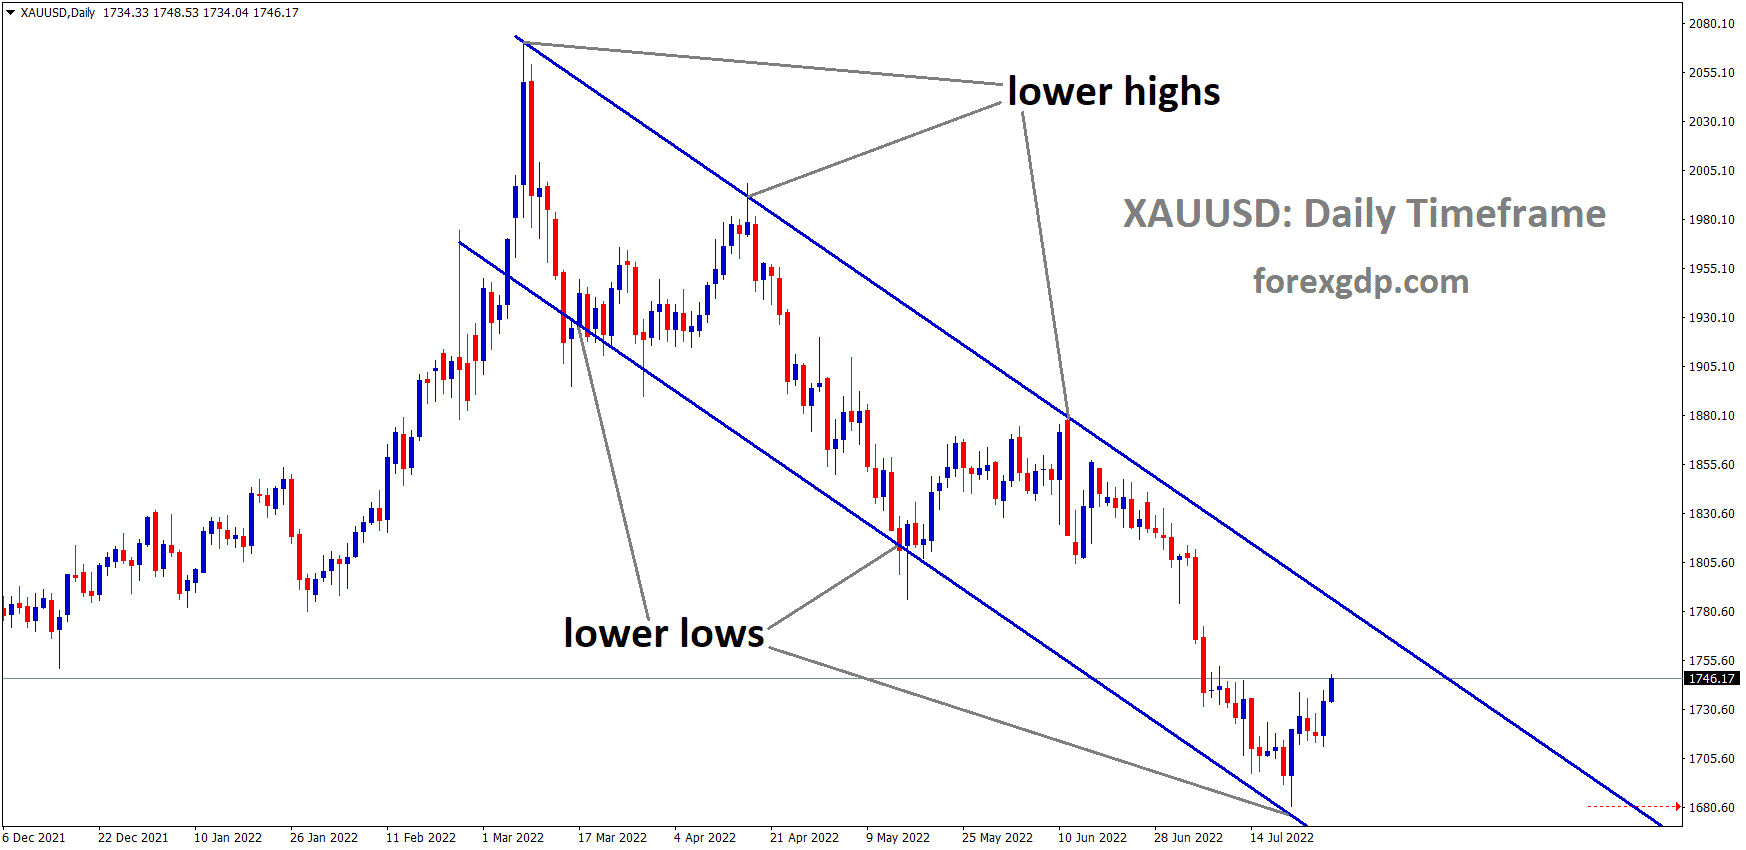 XAUUSD Gold price is moving in the Descending channel and the Market has rebounded from the Lower low area of the channel 4